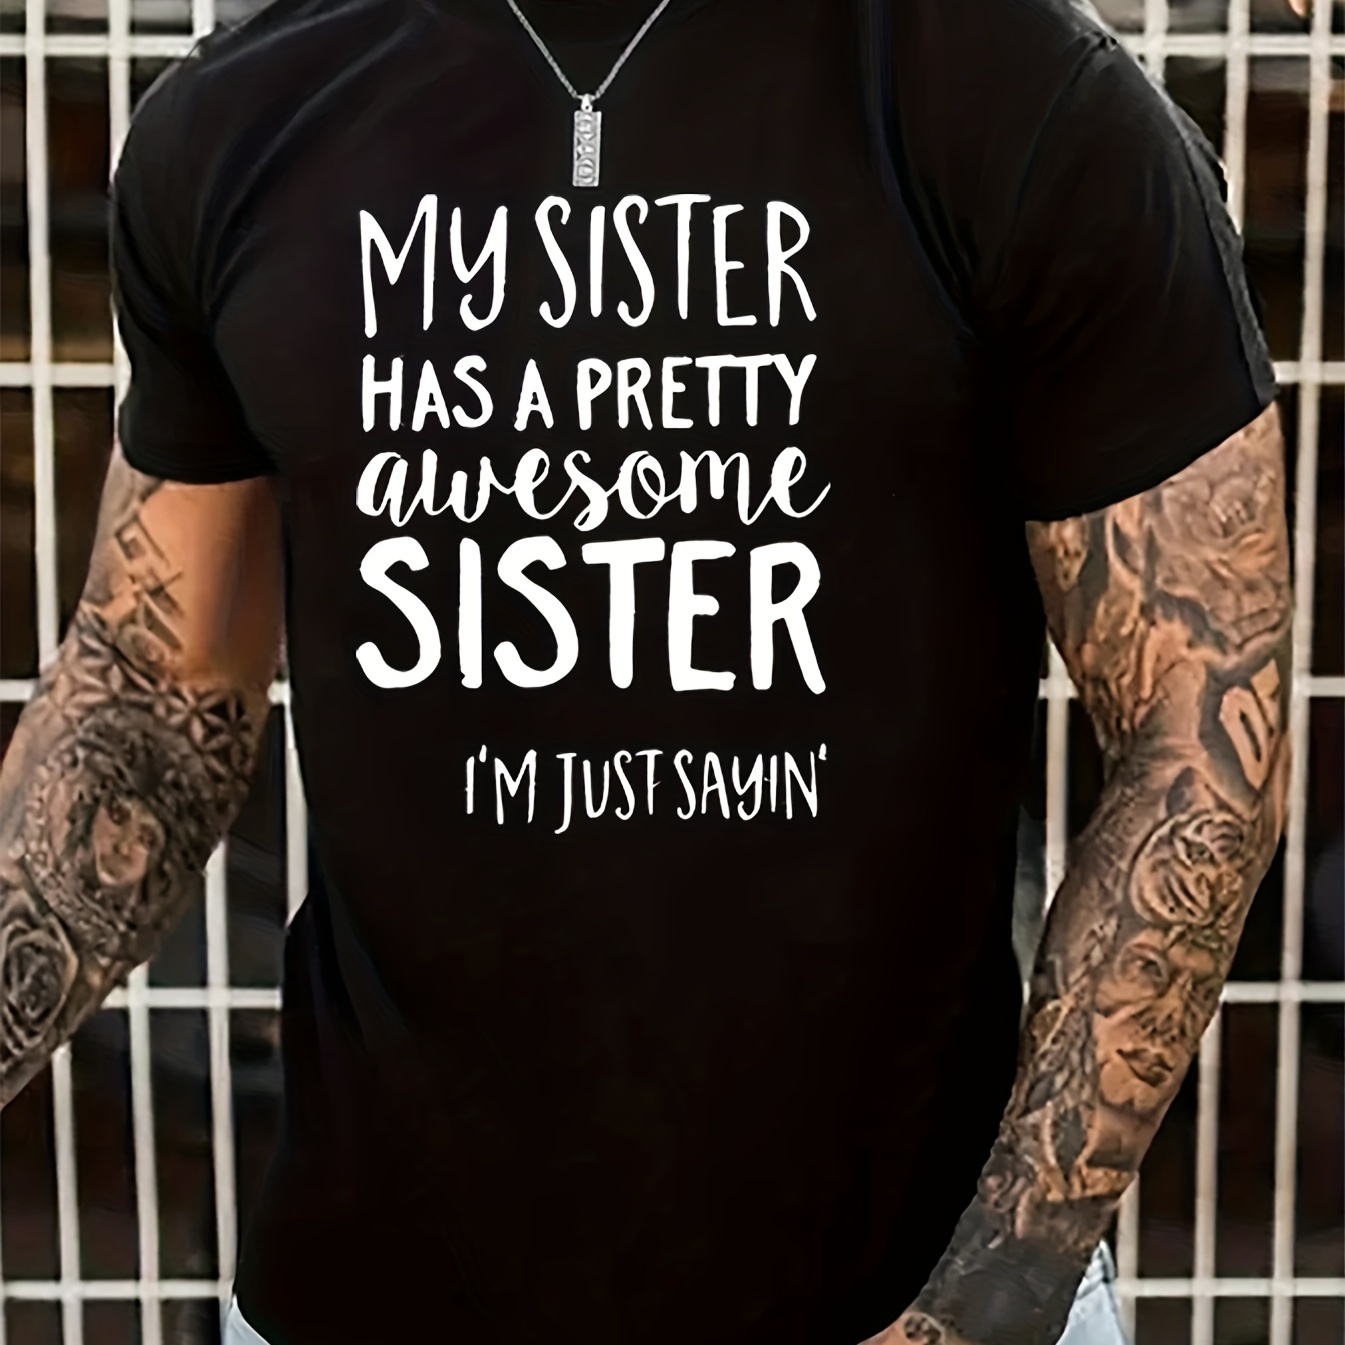 

My Sister Has An Awesome Sister Print Men's Round Neck Short Sleeve Tee Fashion Regular Fit T-shirt Top For Spring Summer Holiday